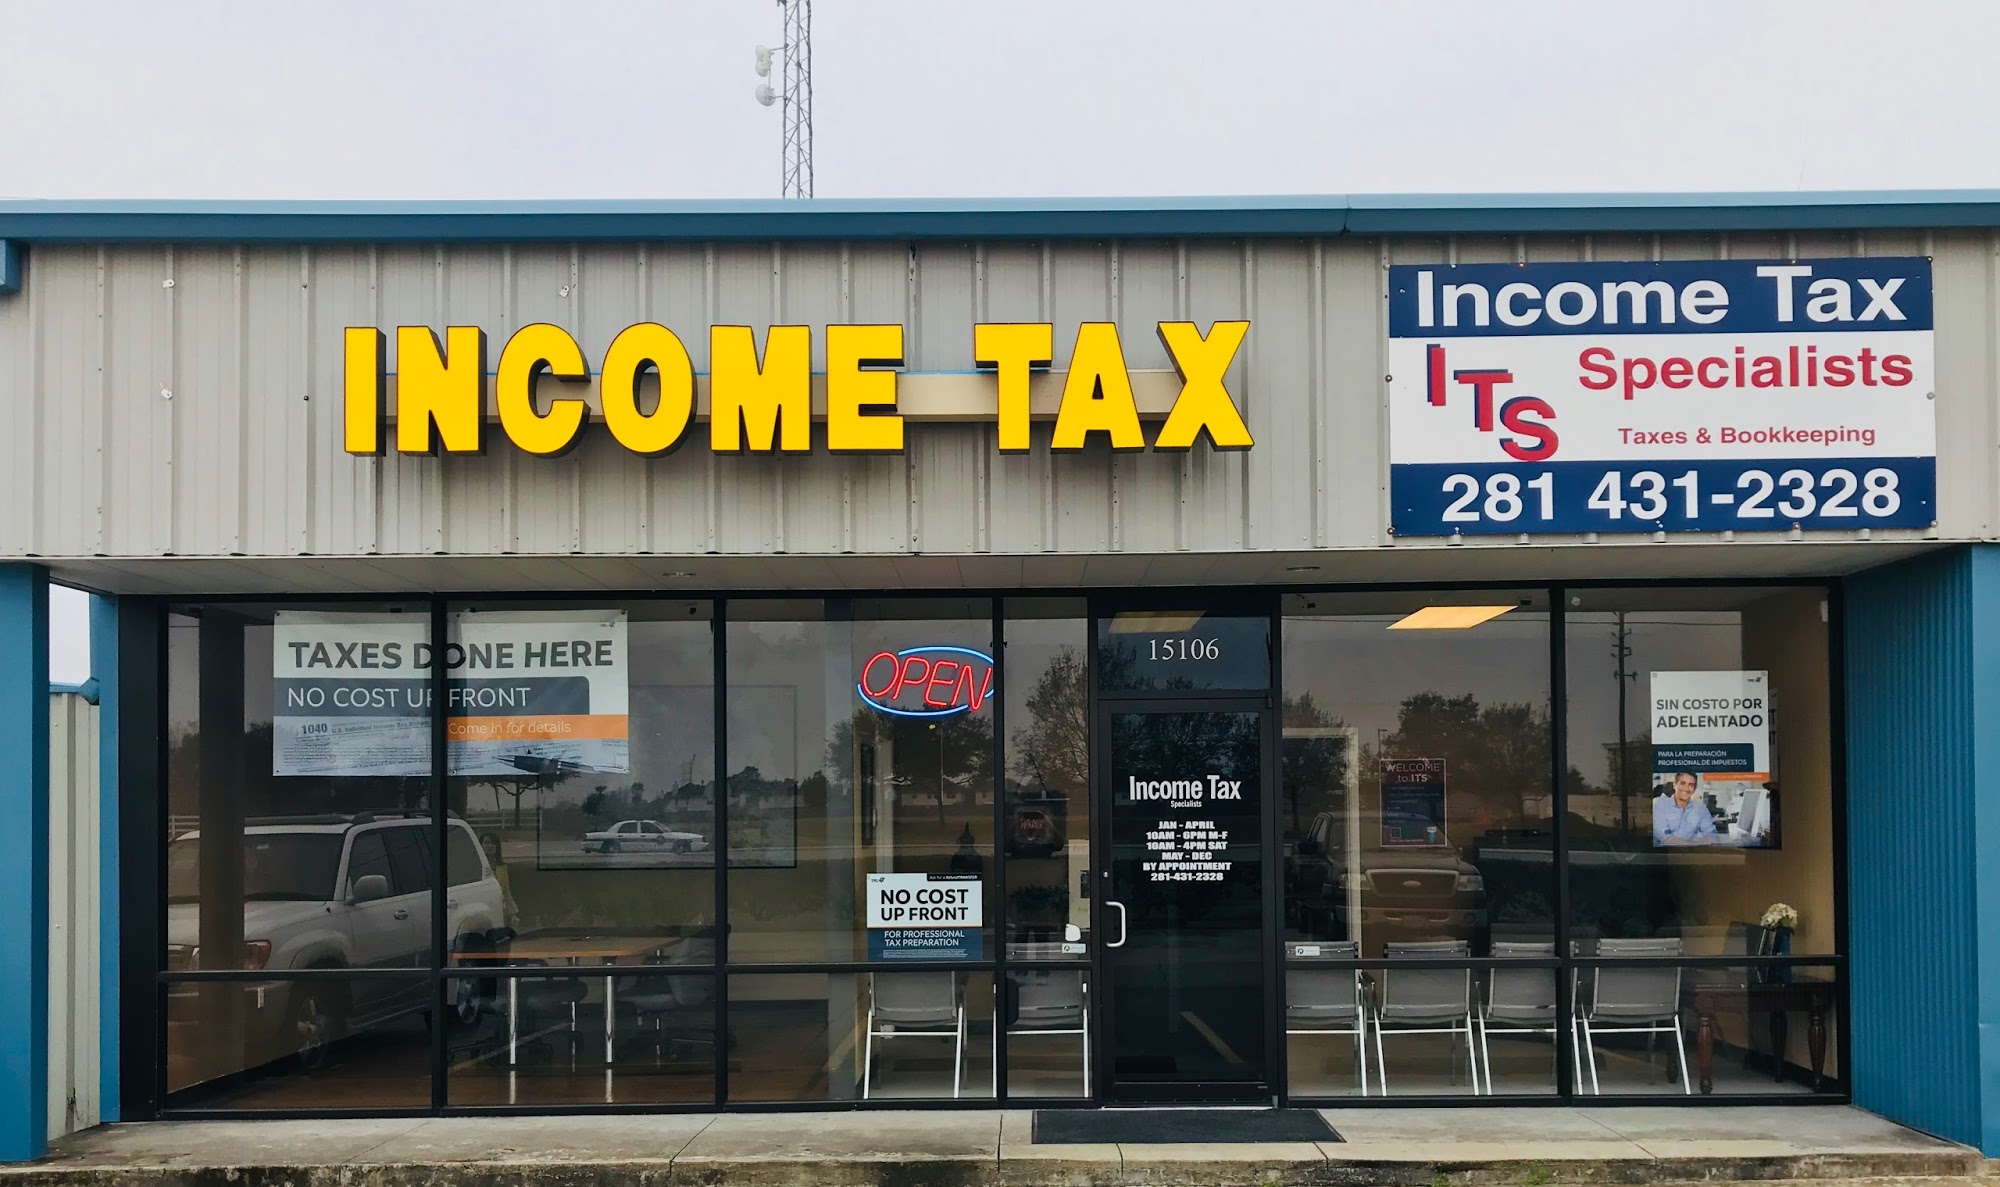 INCOME TAX SPECIALISTS